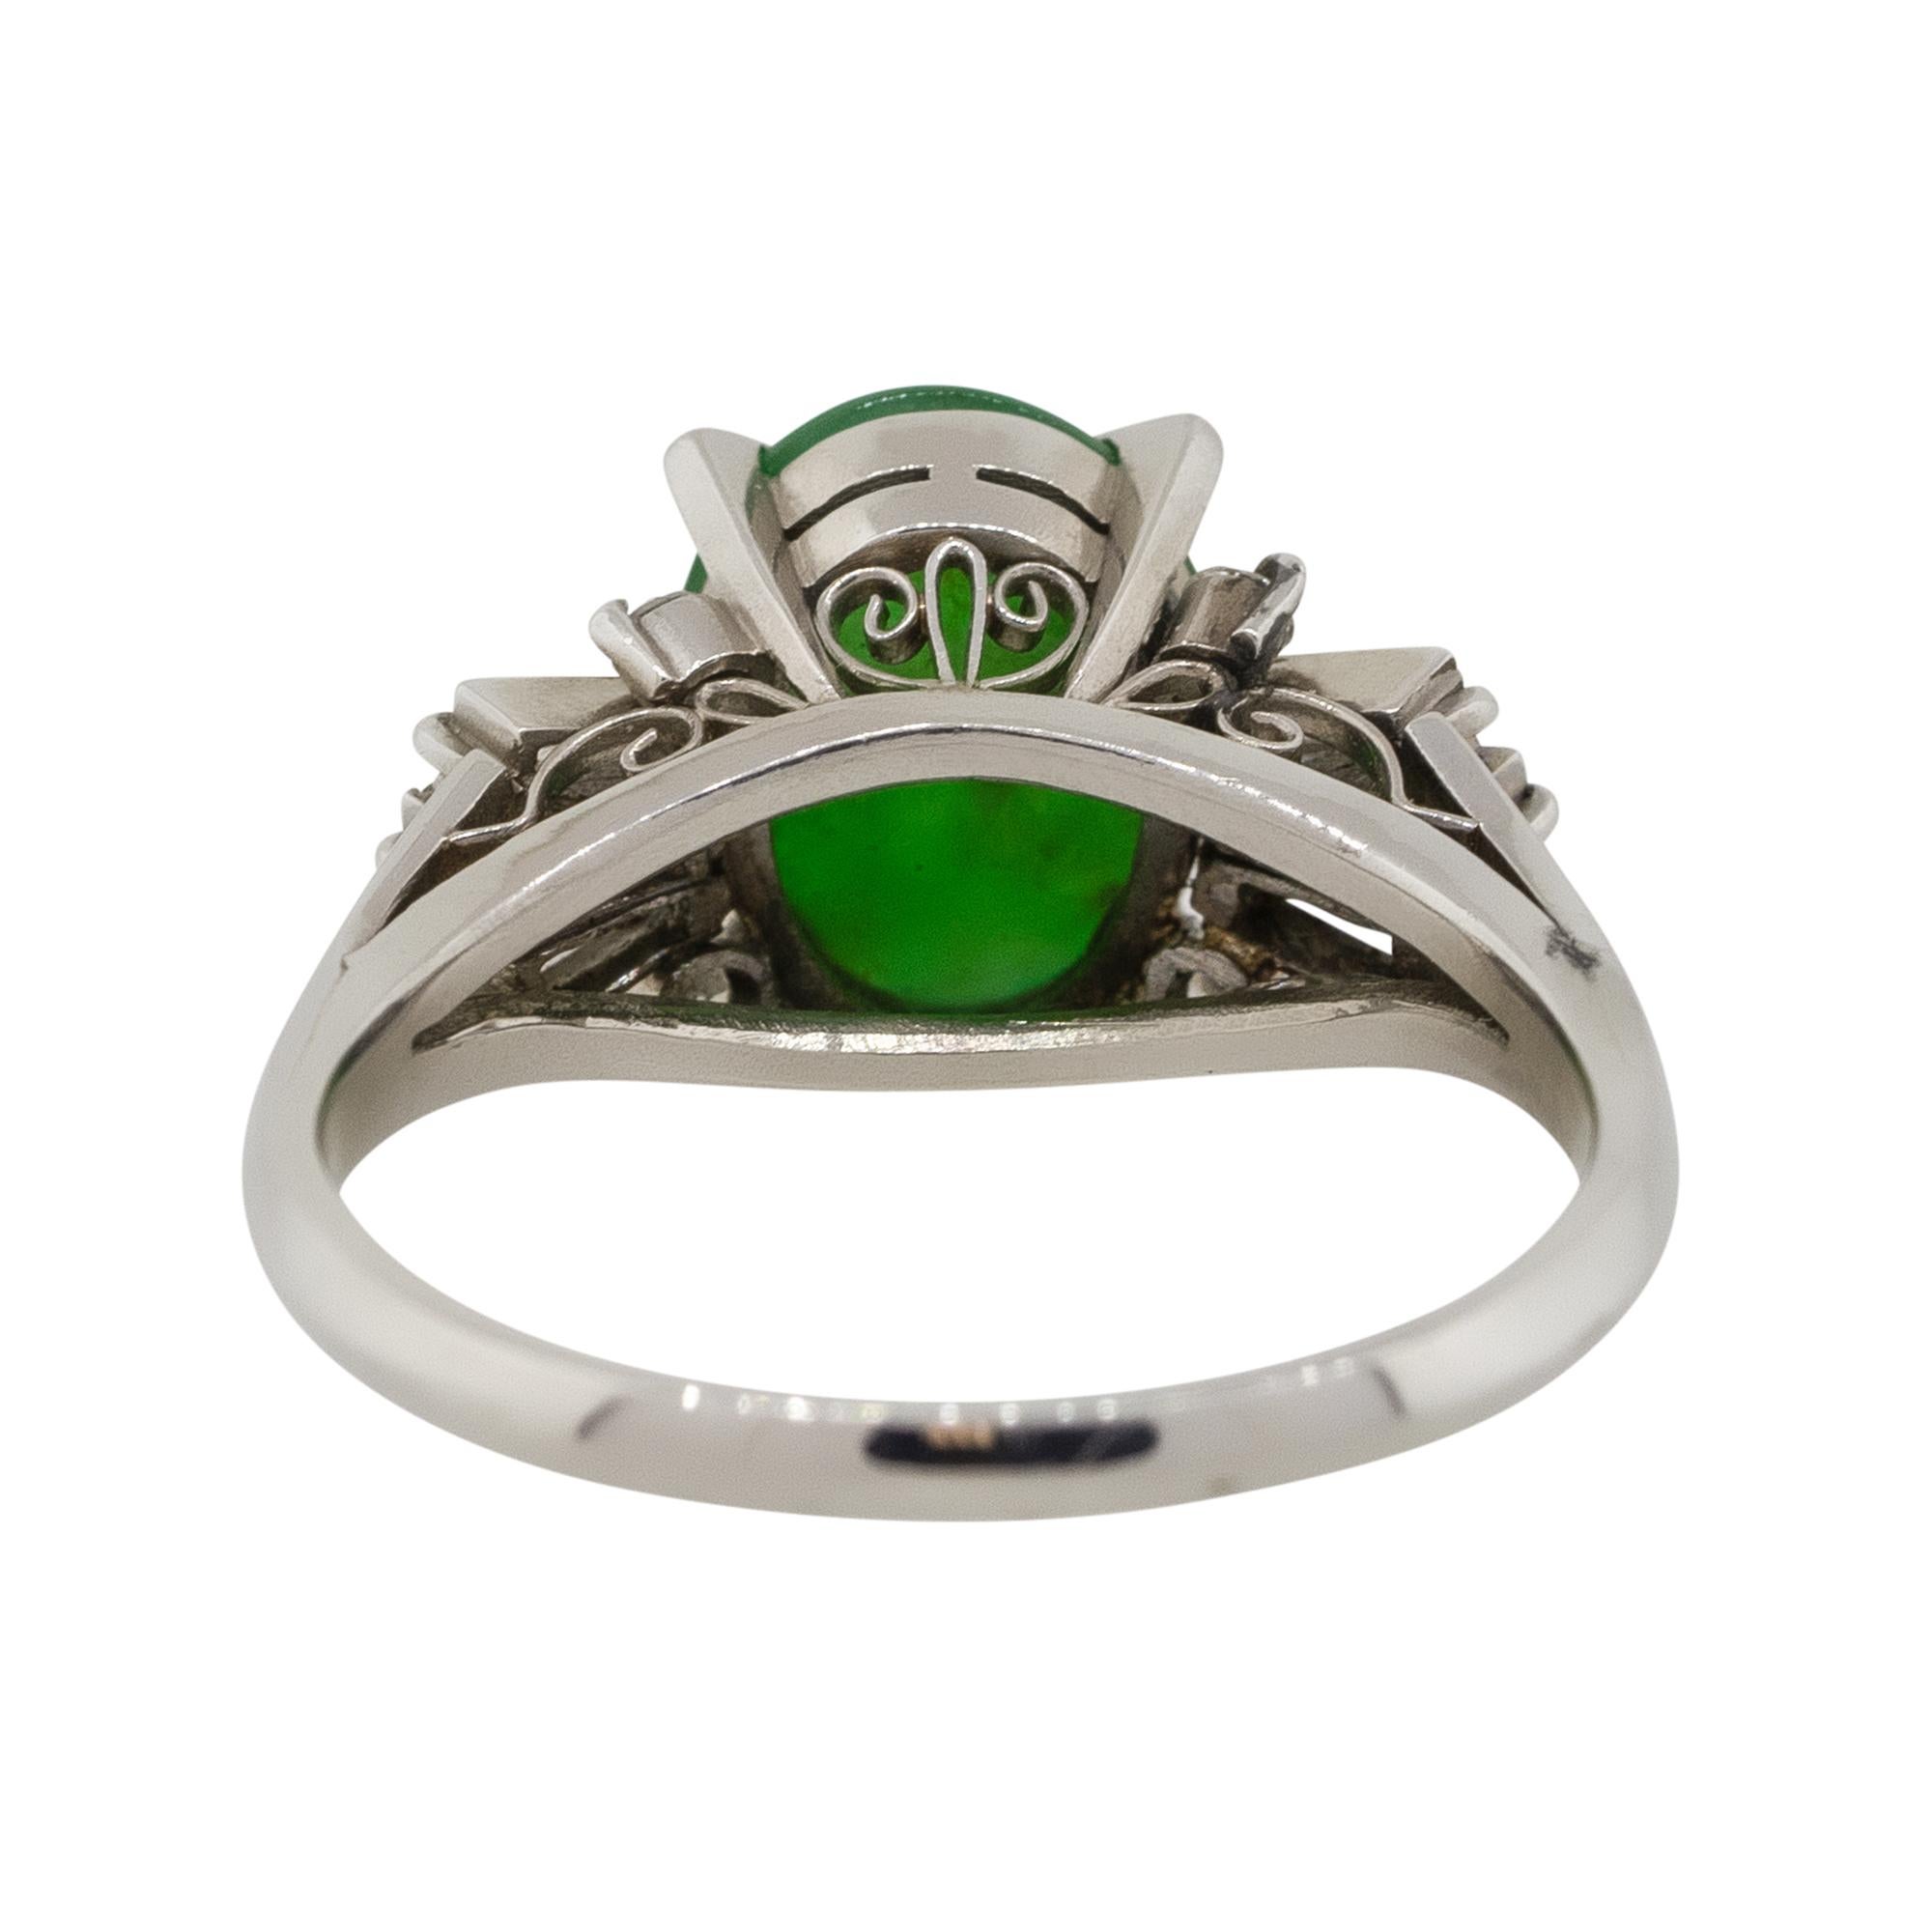 2.98 Carat Oval Jade Center Diamond Cocktail Ring Platinum in Stock In Excellent Condition For Sale In Boca Raton, FL